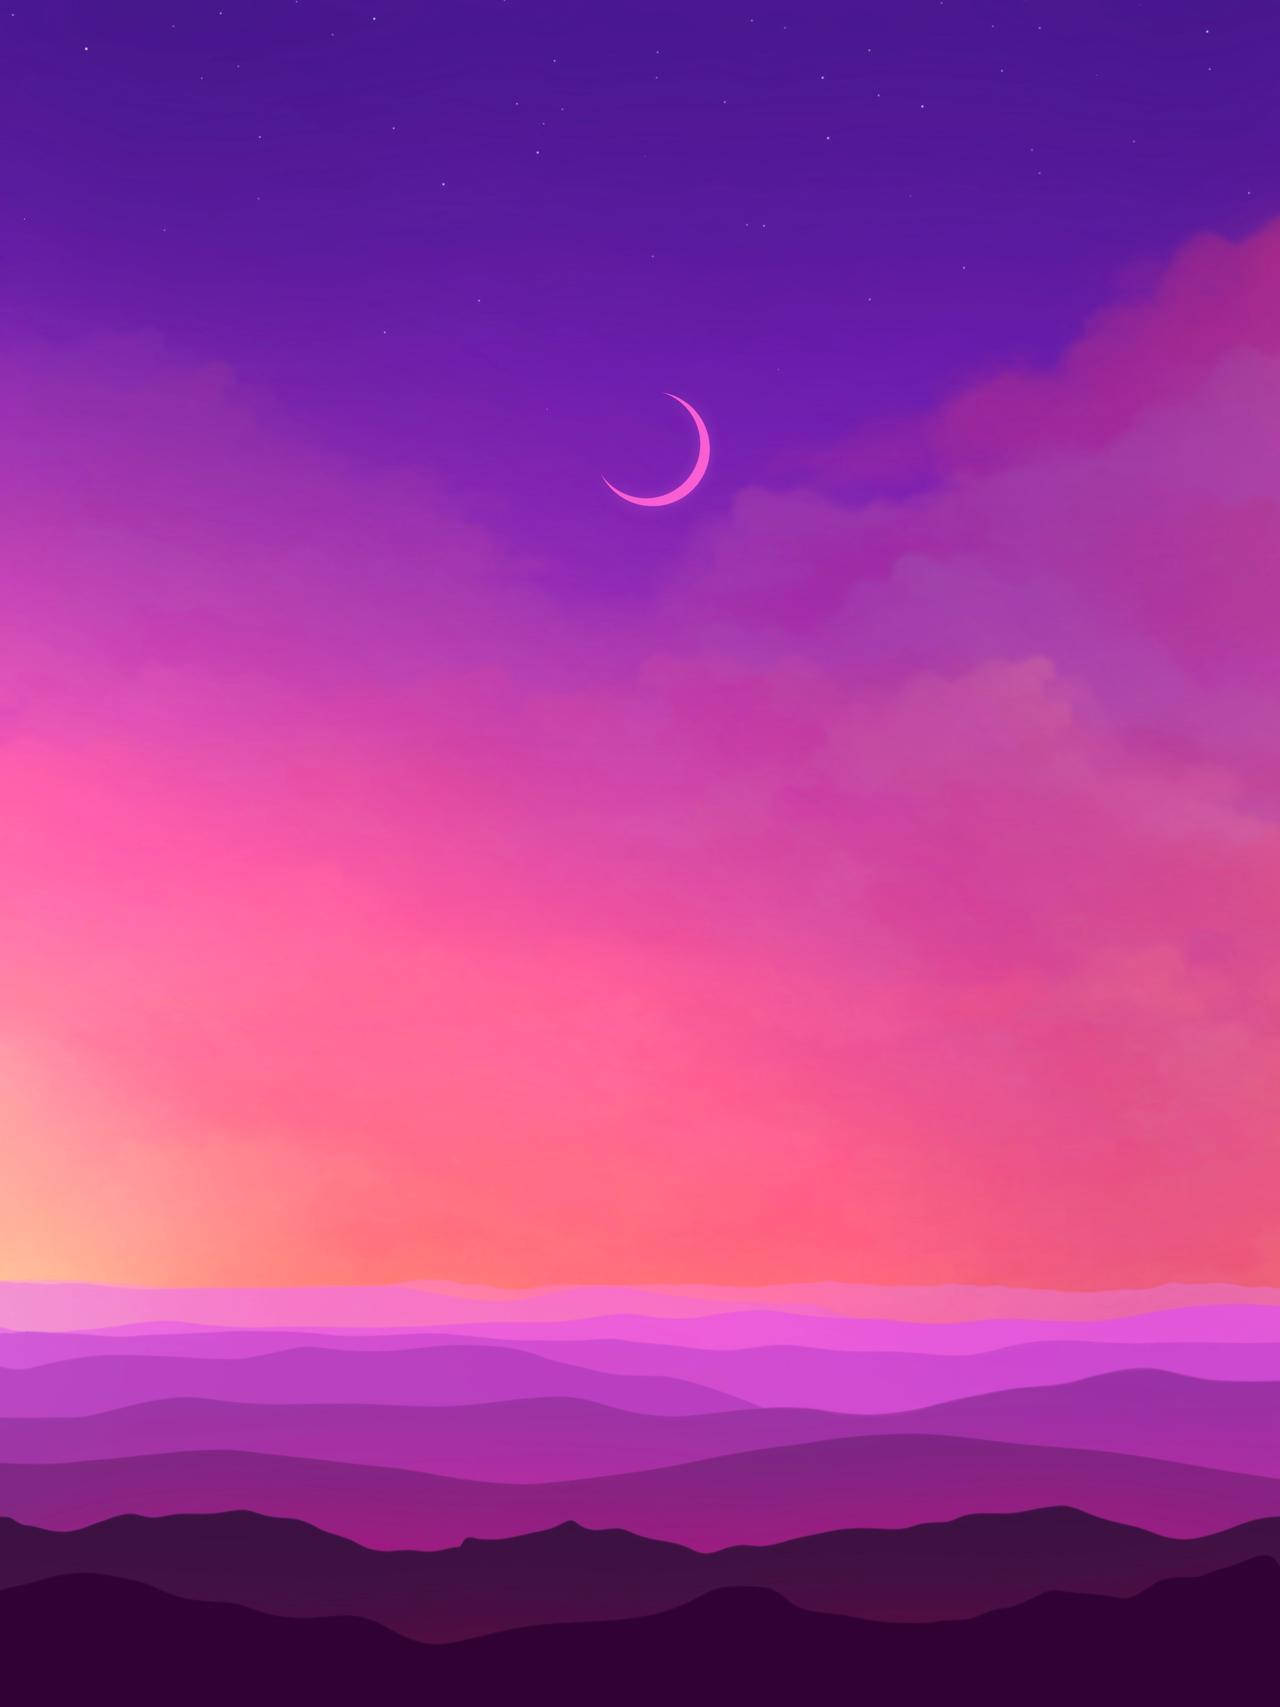 The Dreamy Aesthetic of the Pink Moon Wallpaper